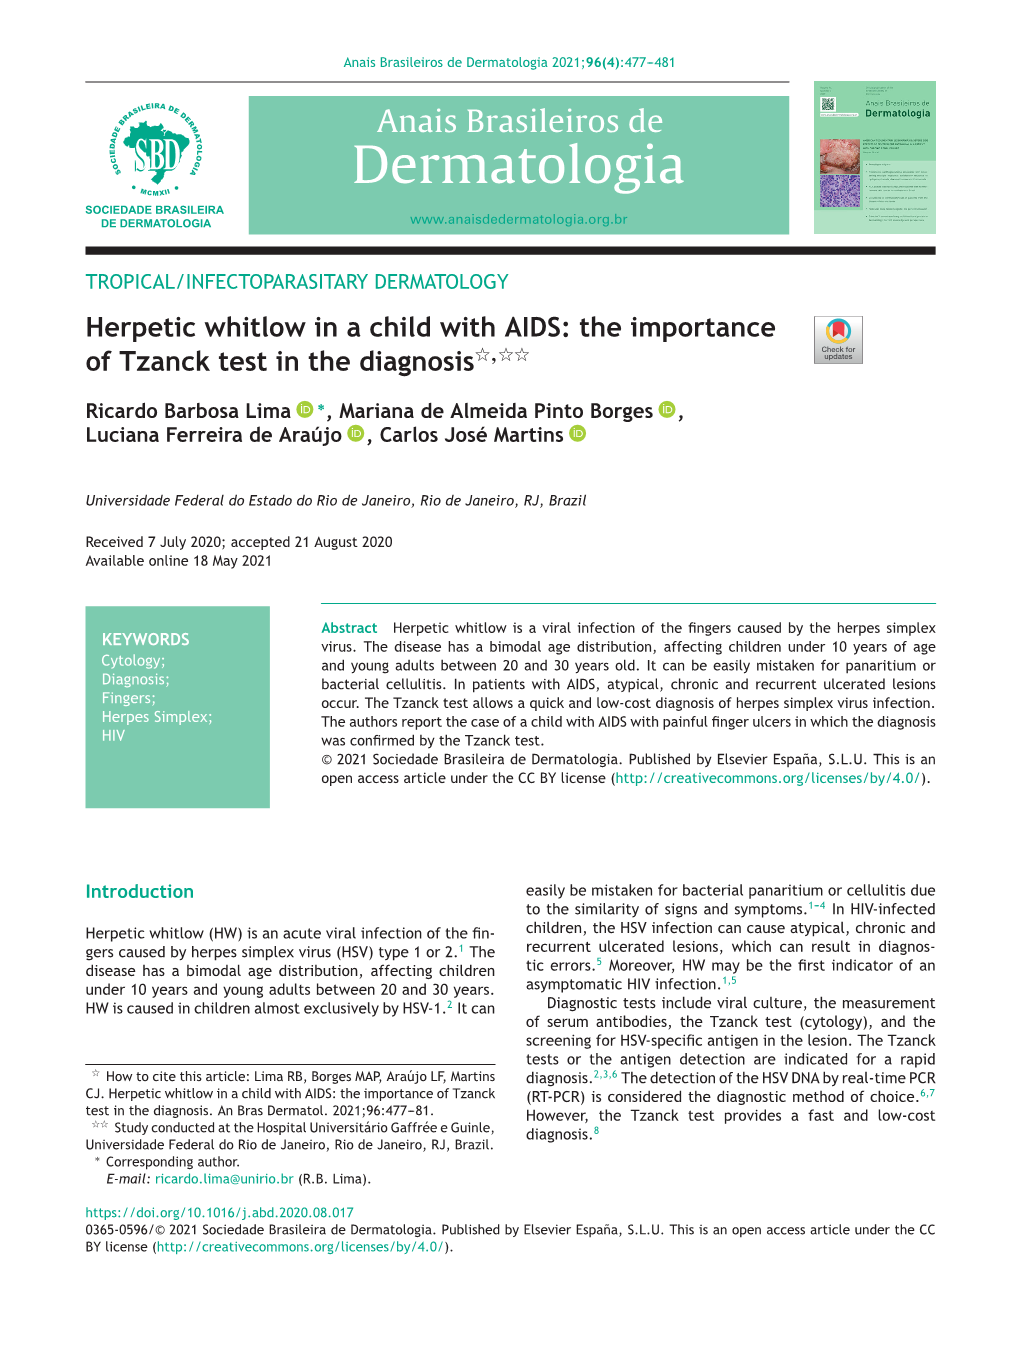 Herpetic Whitlow in a Child with AIDS: the Importance of Tzanck Test in the Diagnosis